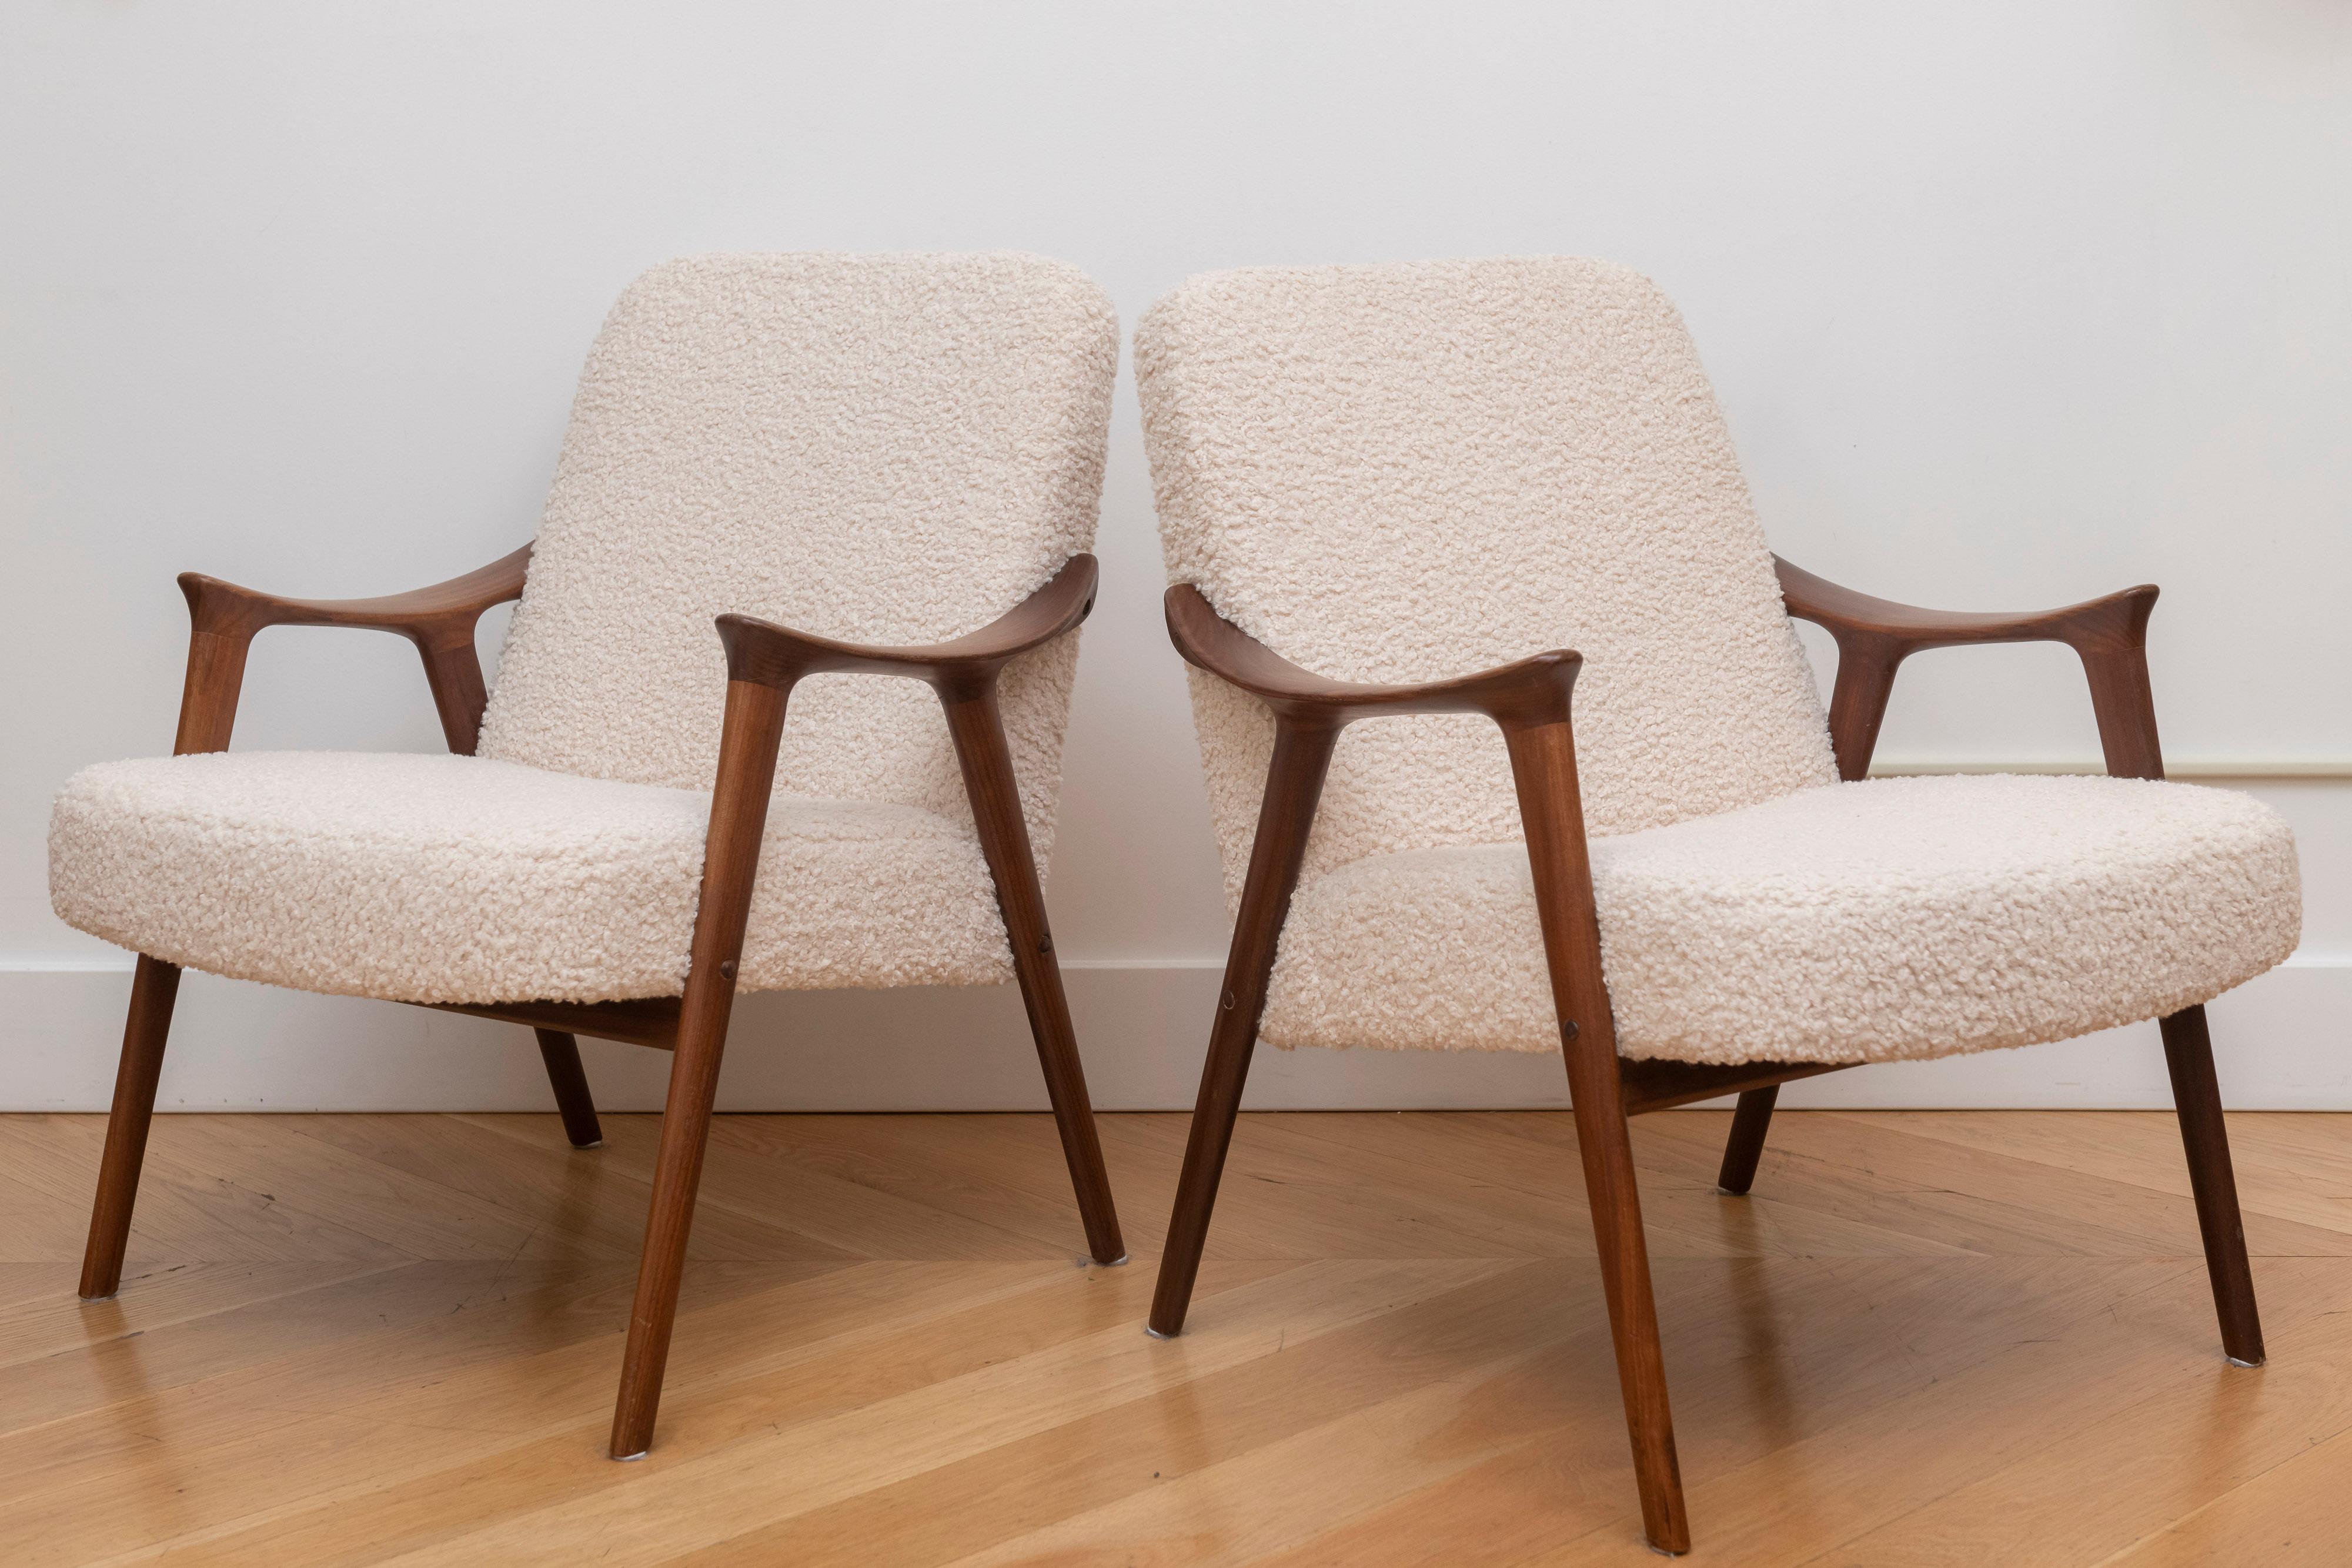 Stunning vintage armchairs in solid afromosia wood, designed by Ingmar Relling for Westnofa in the 1960s.
The condition is superb throughout, we have had this newly upholstered in a lovely bouclé fabric. The frame is clean, sturdy and sound, with